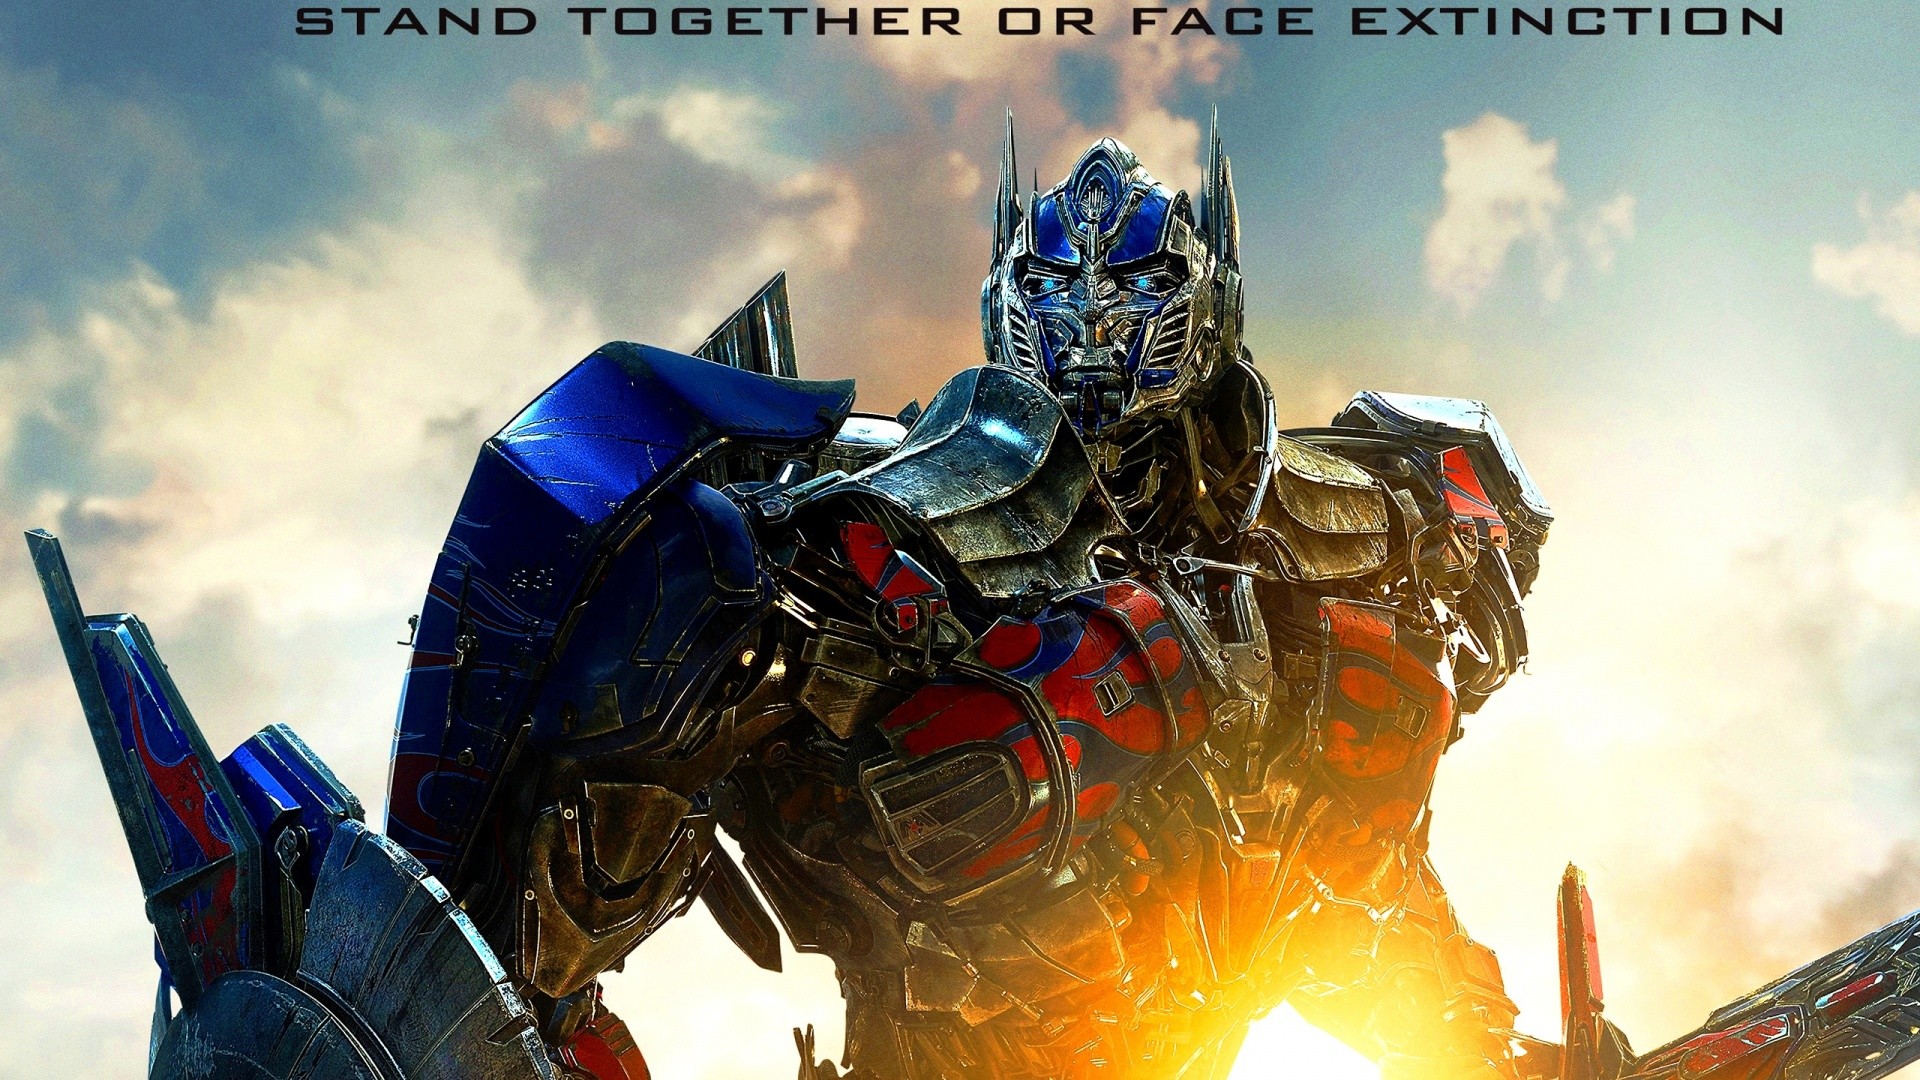 Transformers Age Of Extinction Hd Wallpaper 1920 x 1080 Need #iPhone S #Plus #Wallpaper / #Background for #IPhone6SPlus Follow iPhone 6S Plus 3